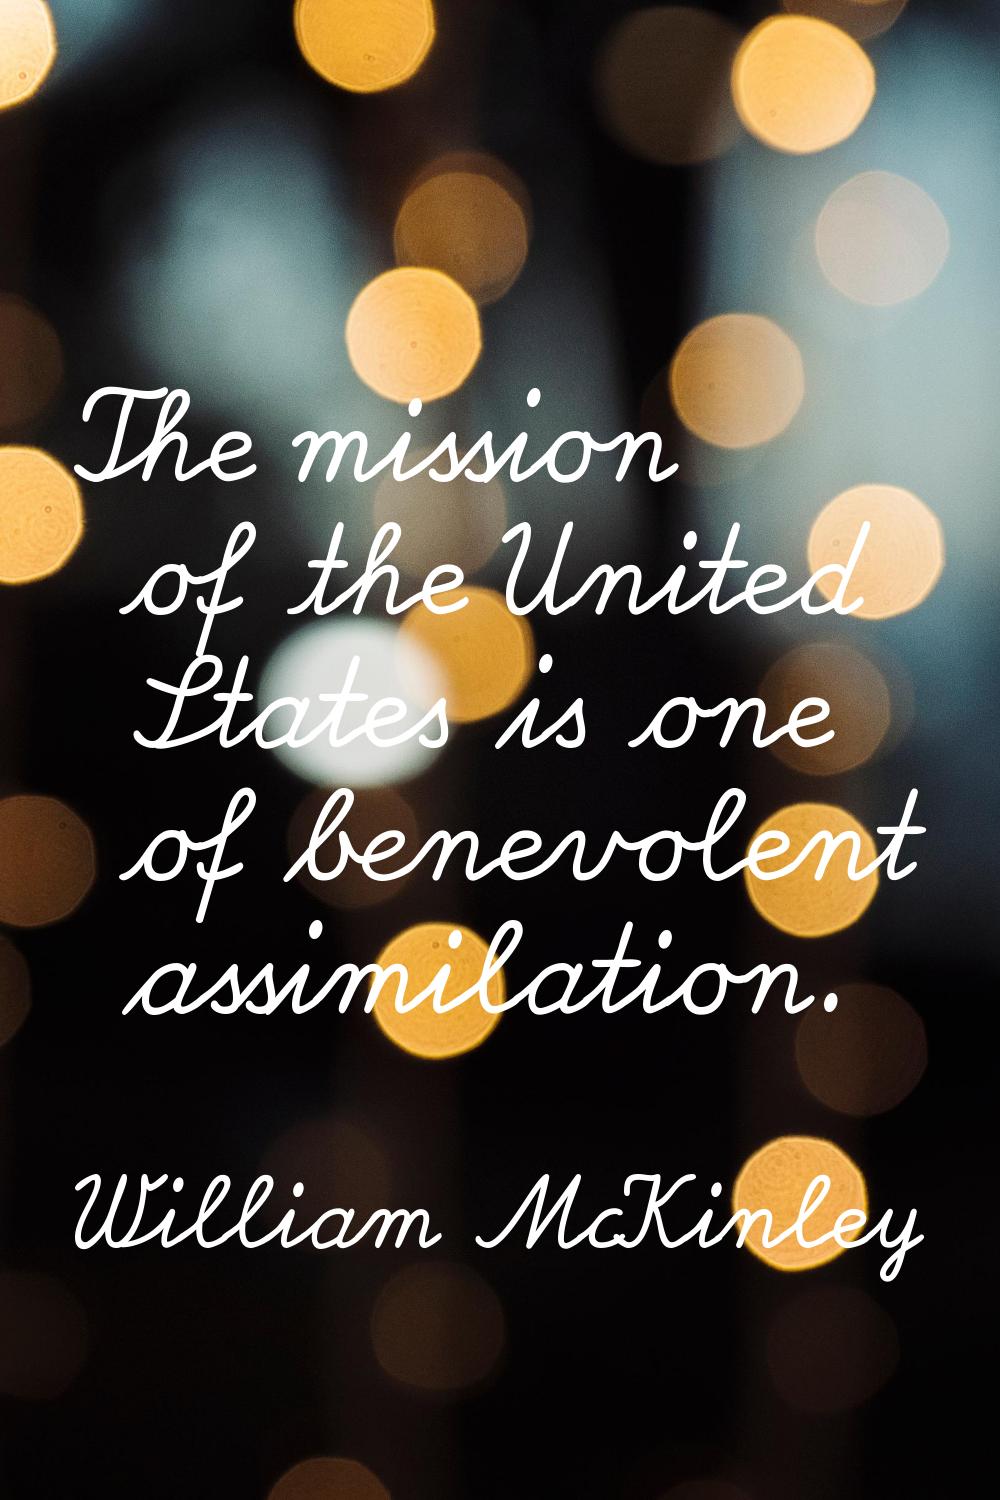 The mission of the United States is one of benevolent assimilation.